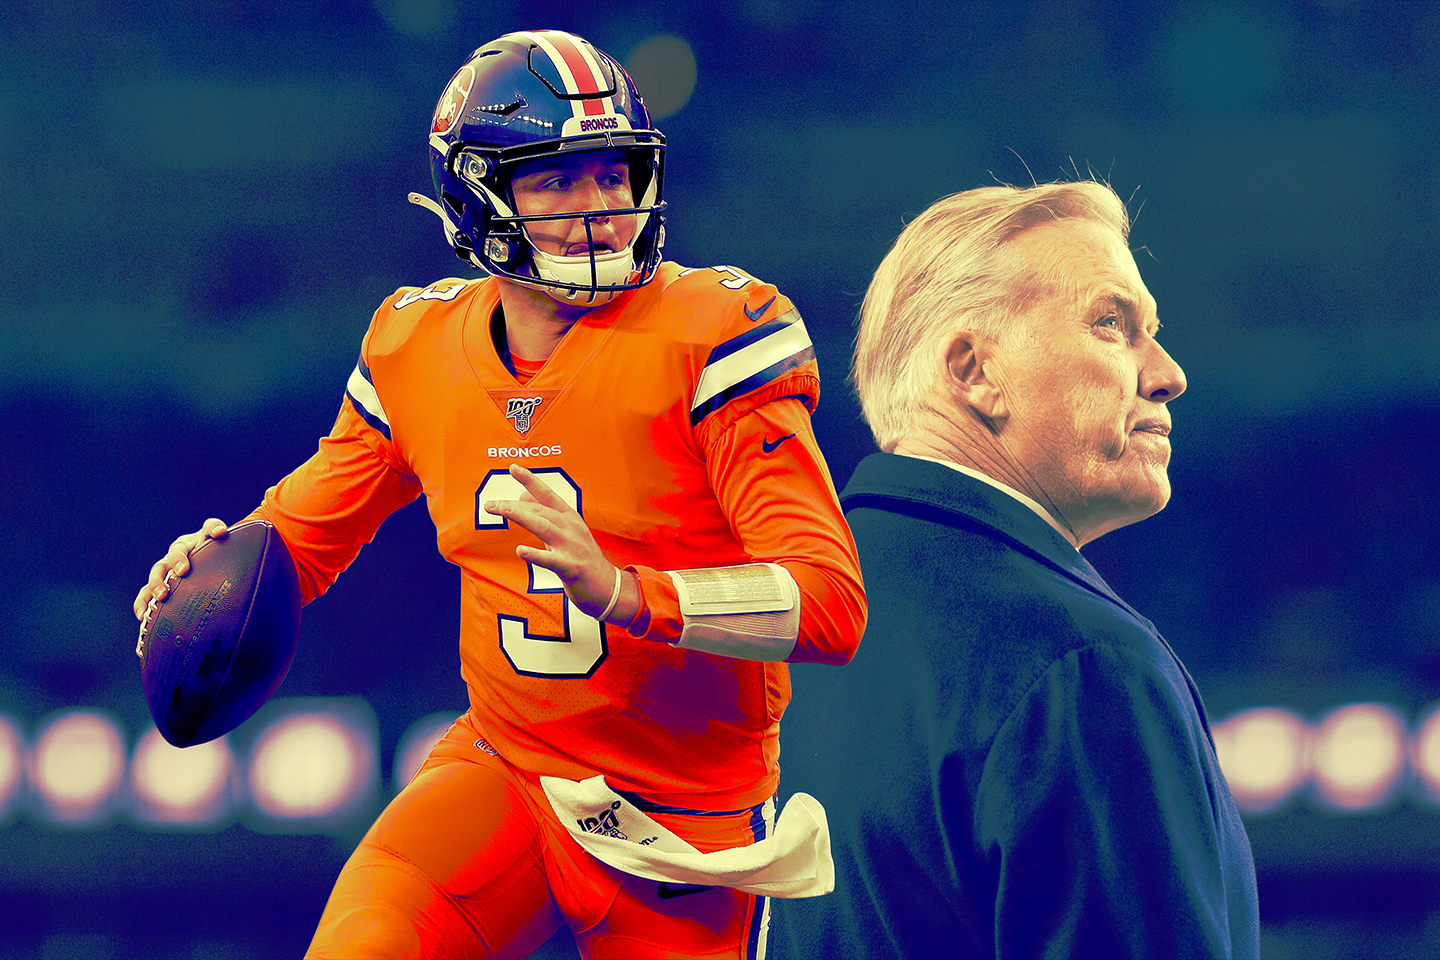 John Elway Retires from NFL After Broncos Exit: 'I Don't Have That